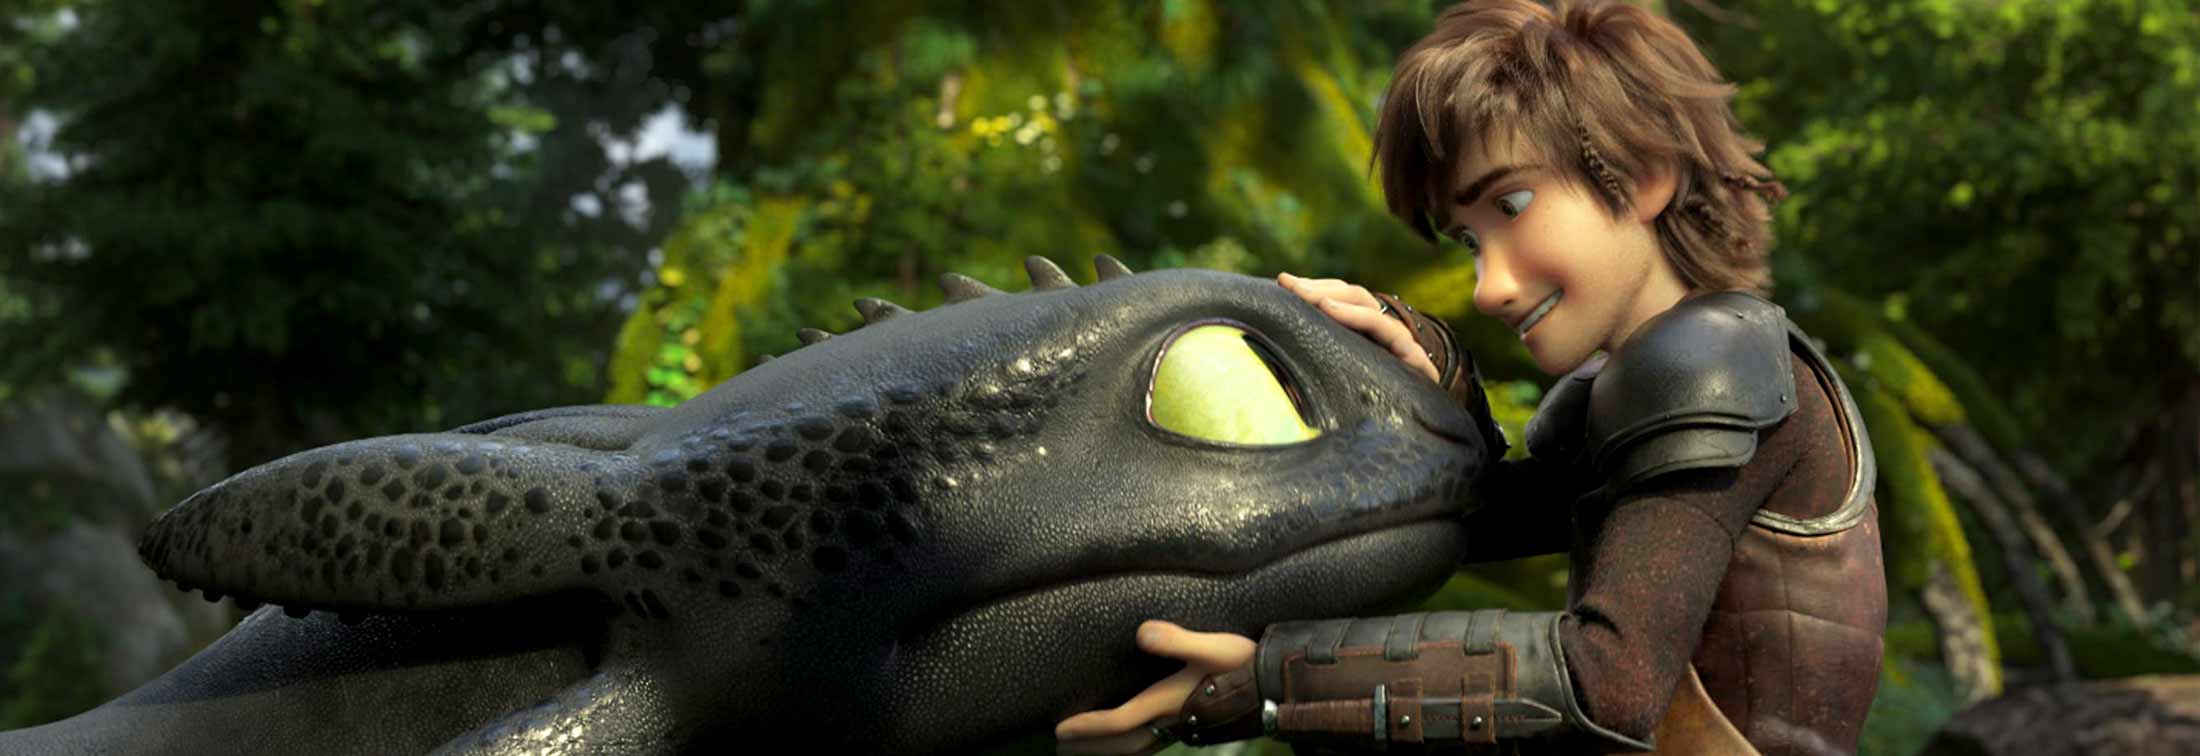 How to Train Your Dragon - An animation that reached new heights